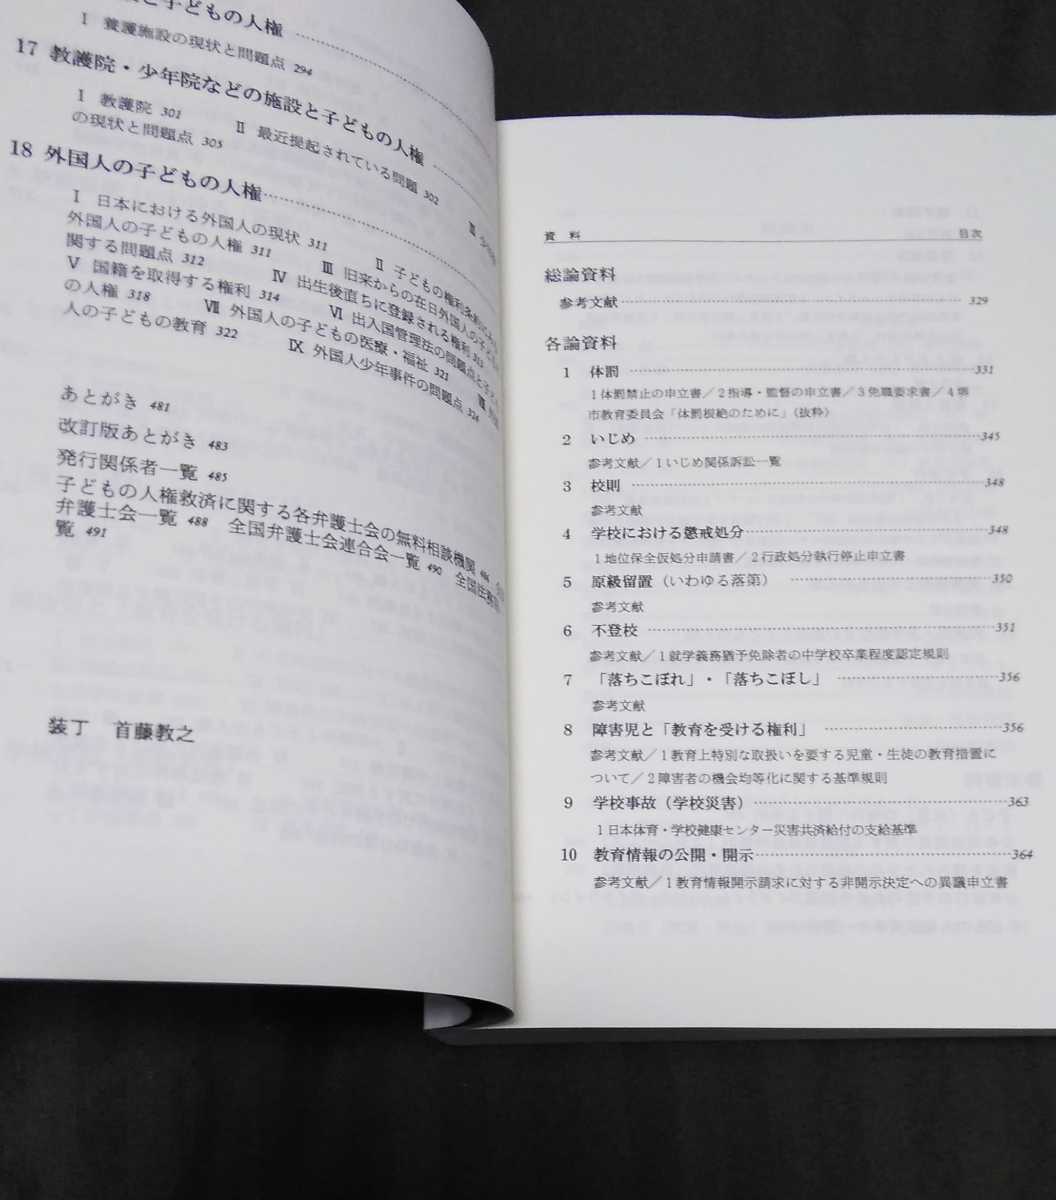  child. rights manual * the first version book@*( modified . version ) child. person right . settled. hand .* Japan lawyer ream ..*96%OFF*